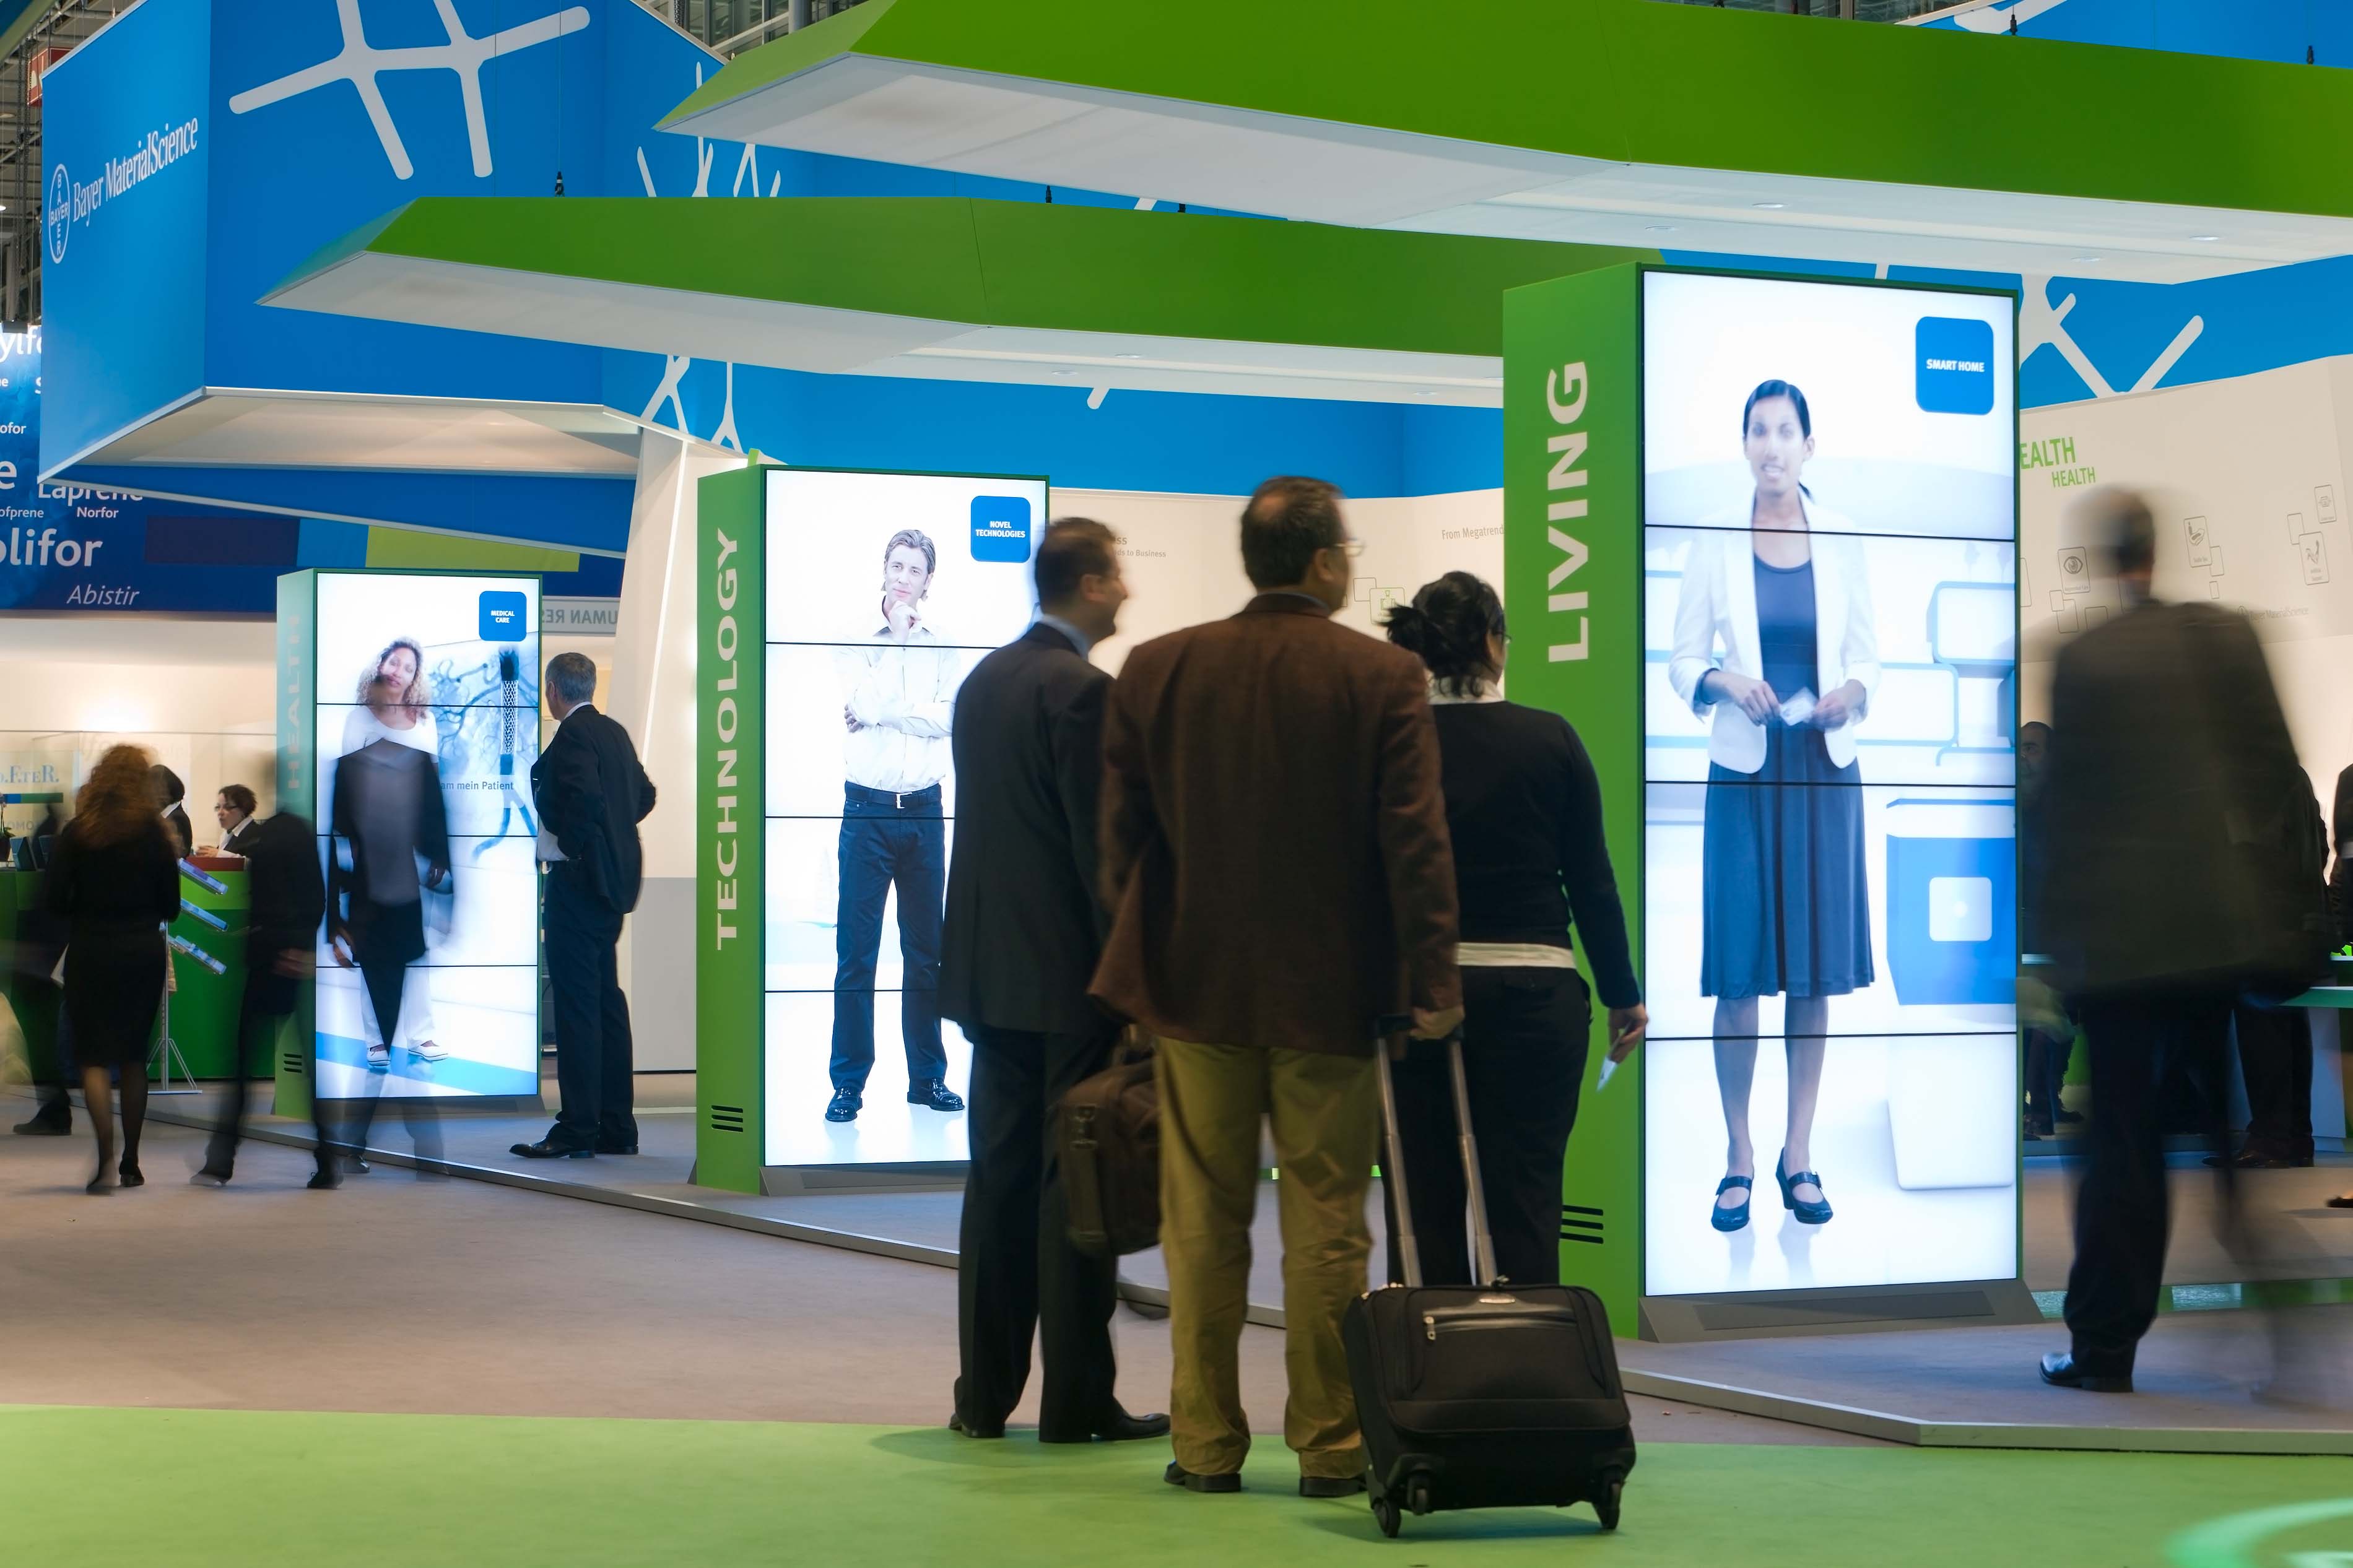 Trade fair visitors stand in front of the boothd. Information pillar shows film